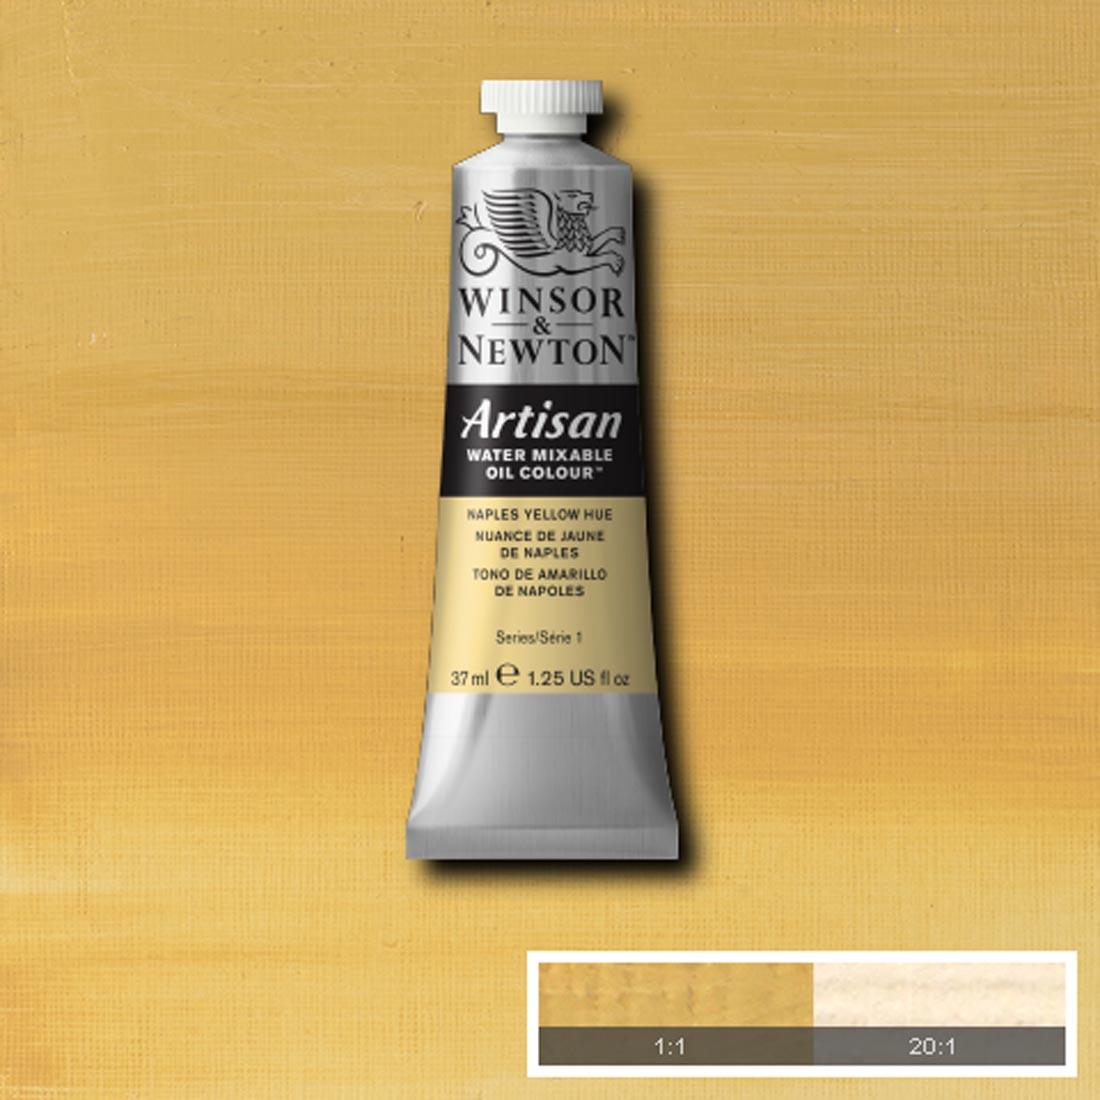 Tube of Naples Yellow Hue Winsor & Newton Artisan Water Mixable Oil Colour with a paint swatch for the background